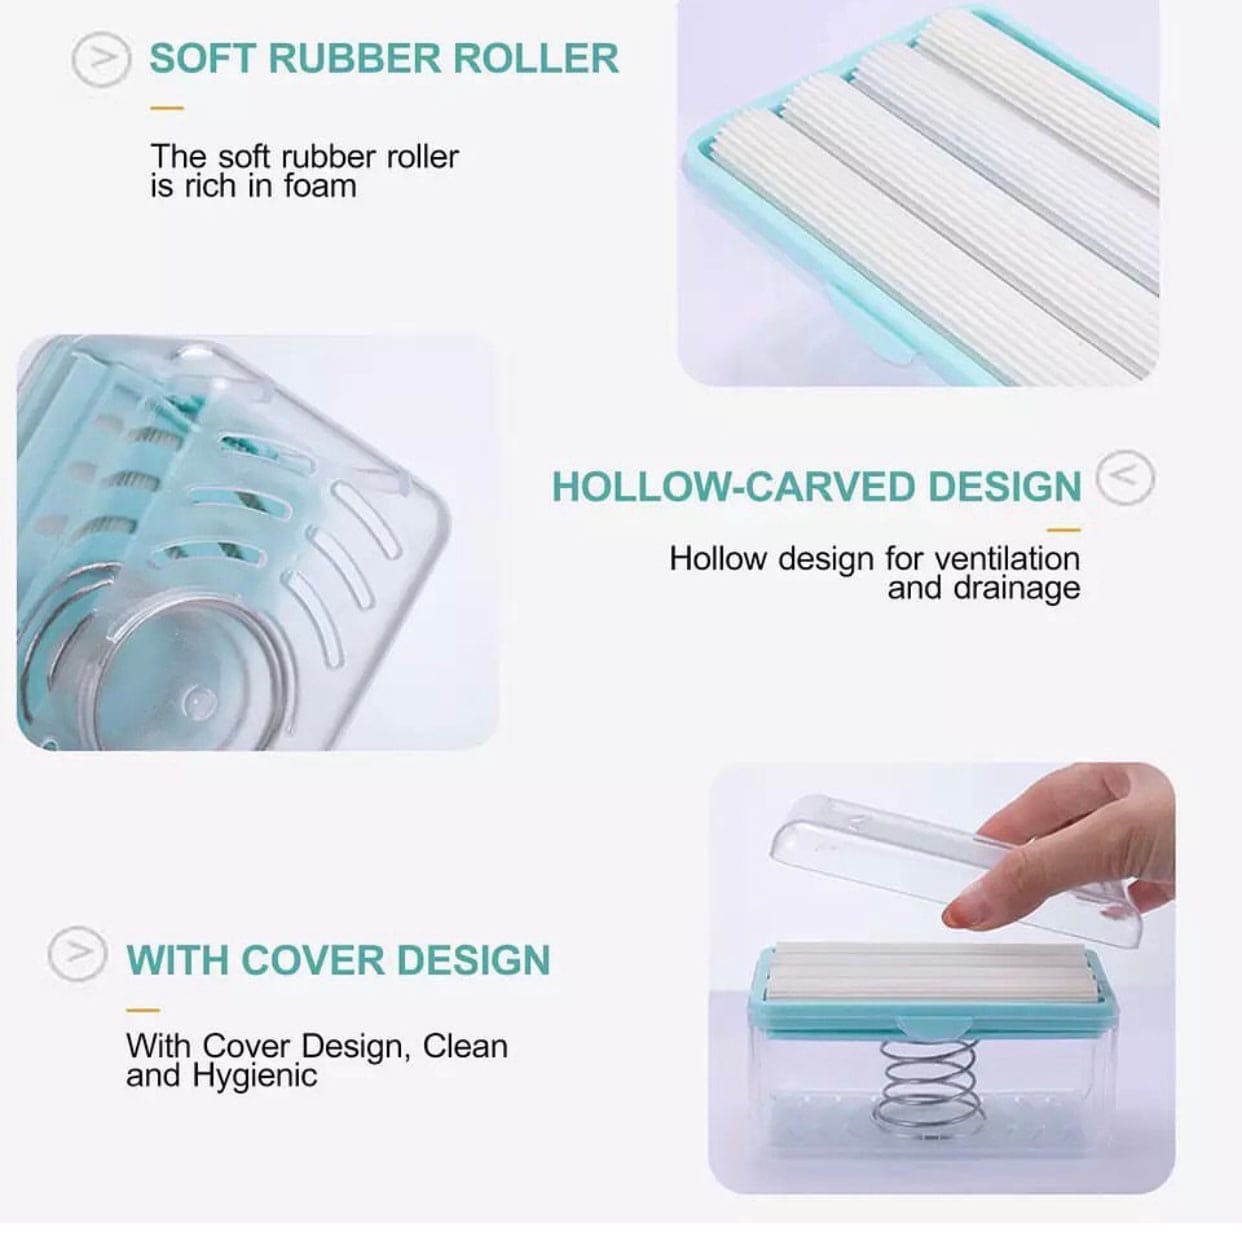 Multifunctional Soap Shower Hand Free Box With Sponge Rollers, Foam Soap Dispenser with Roller and Drain, 2 in 1 Soap Cleaning Storage Foaming Box